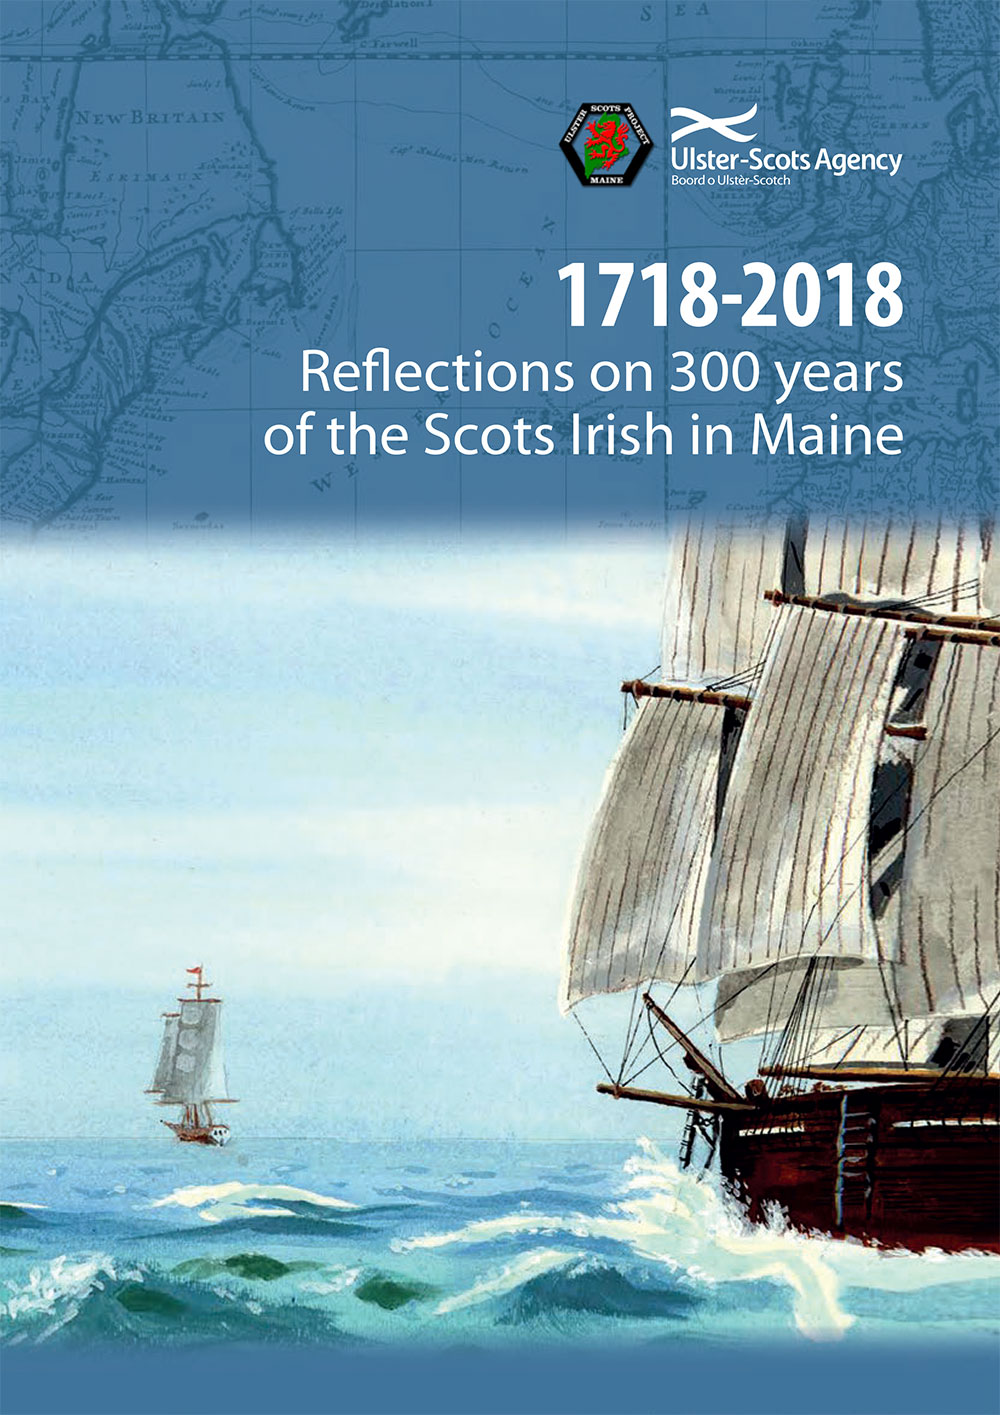 Reflections on 300 years of the Scots Irish in Maine